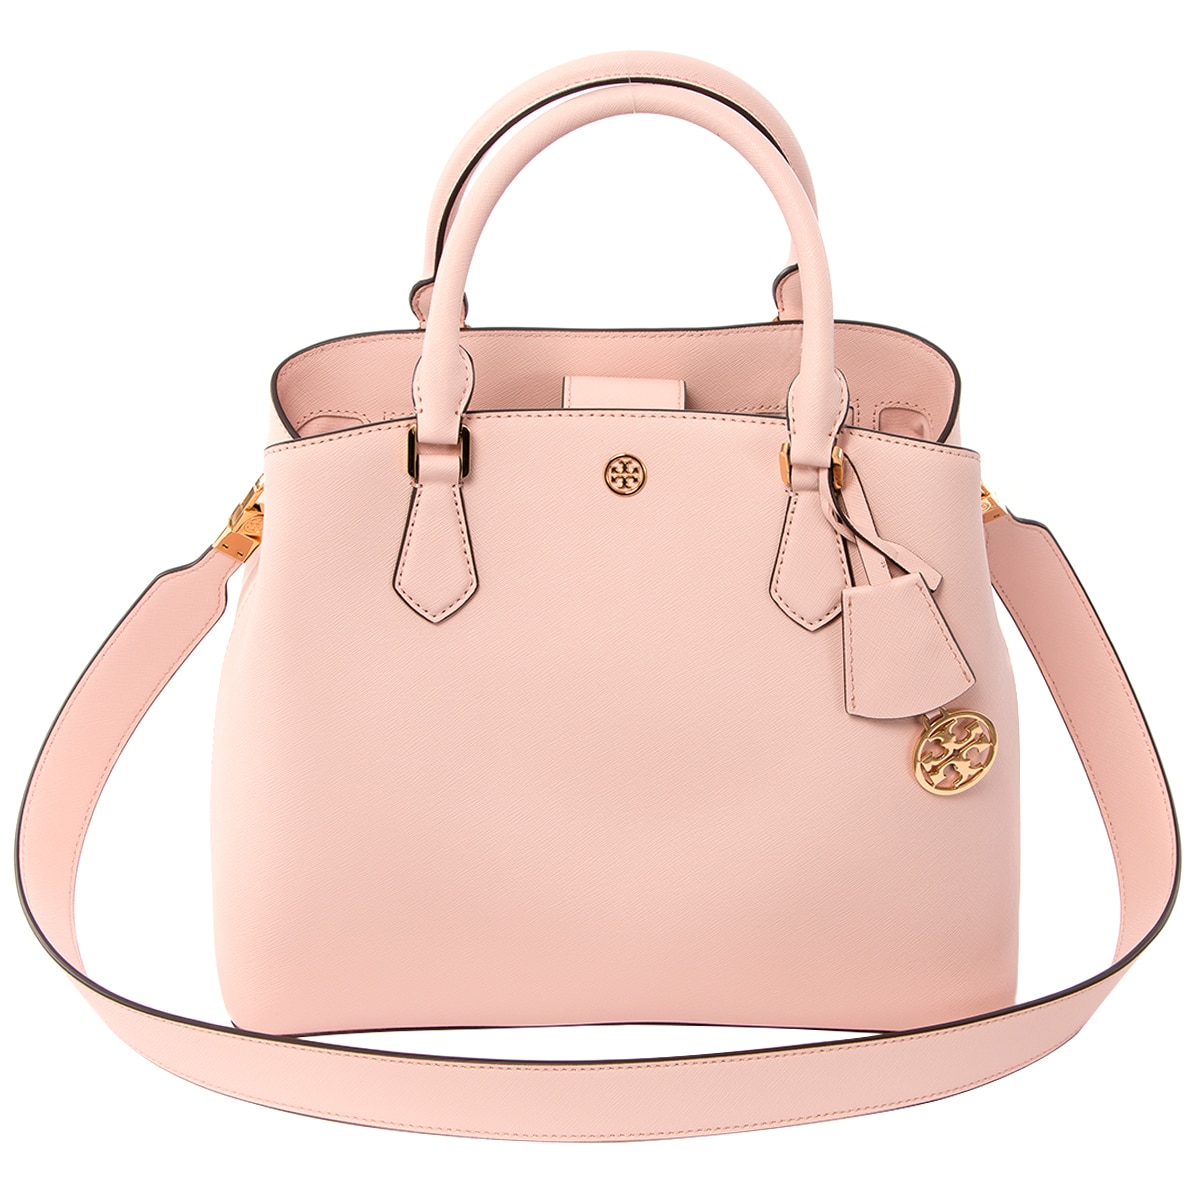 Tory Burch Triple Compartment Tote - Shell Pink